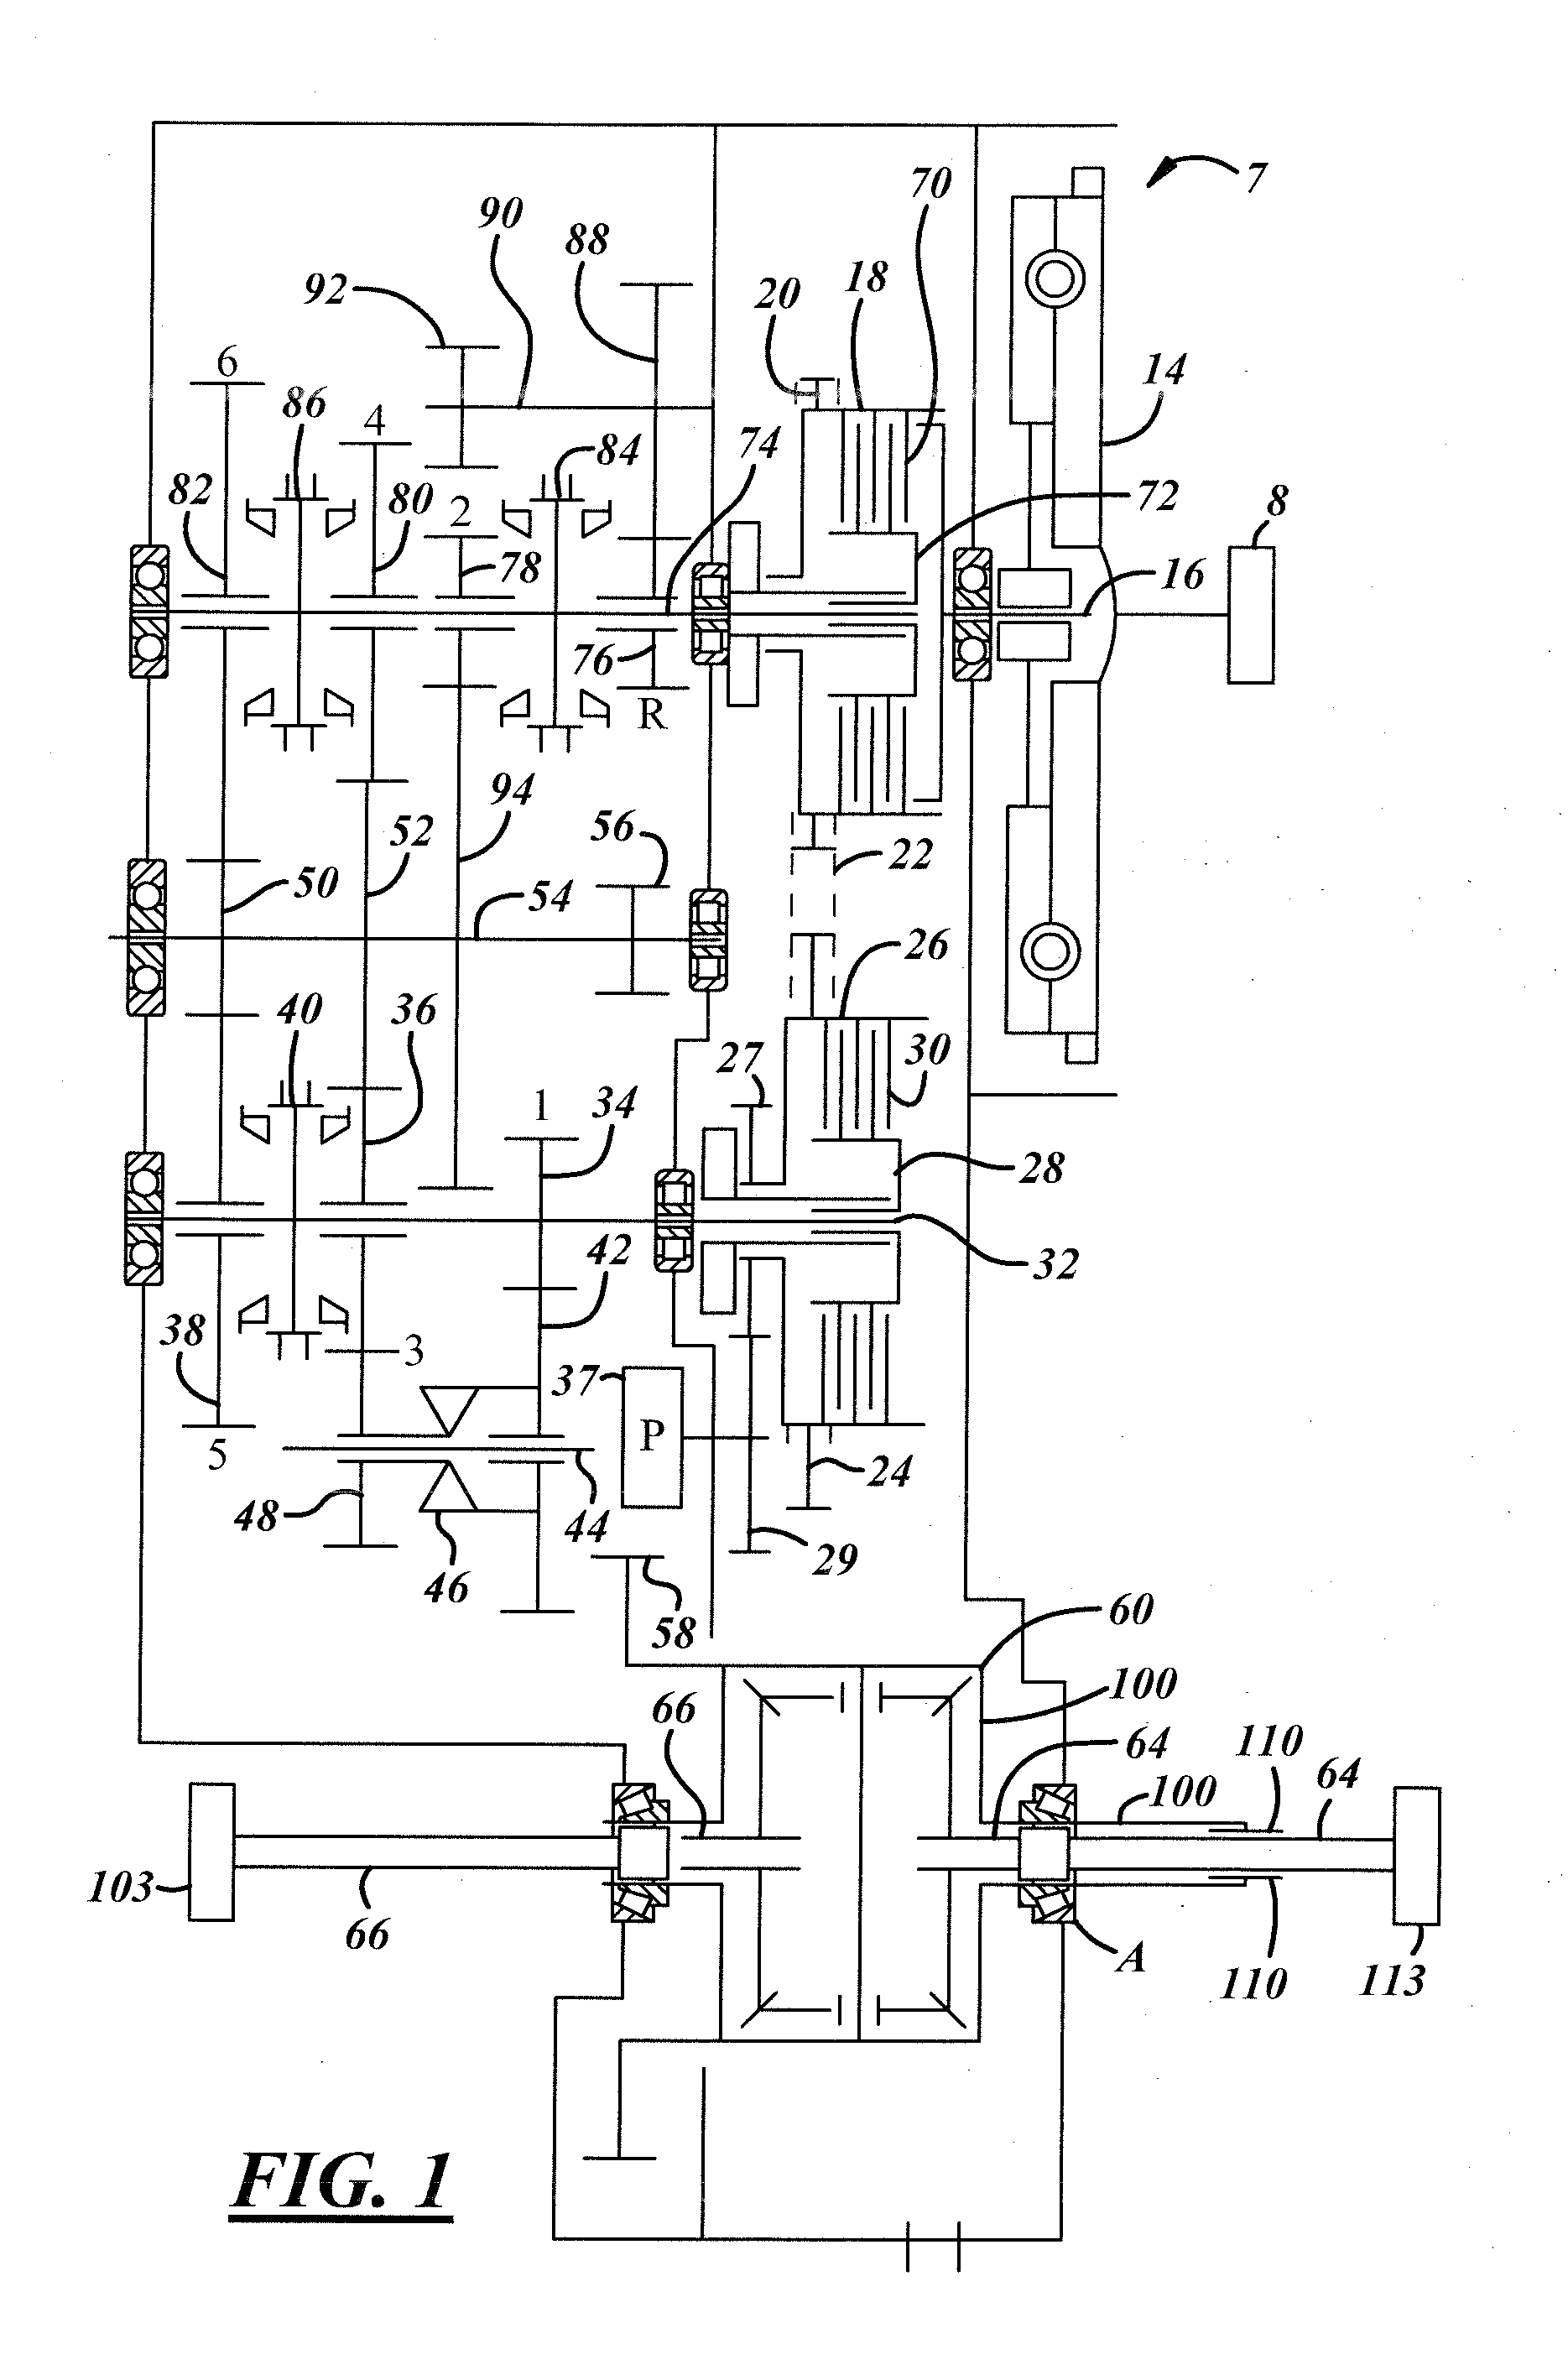 Front wheel drive based power transfer unit (PTU) with hydraulically actuated disconnect